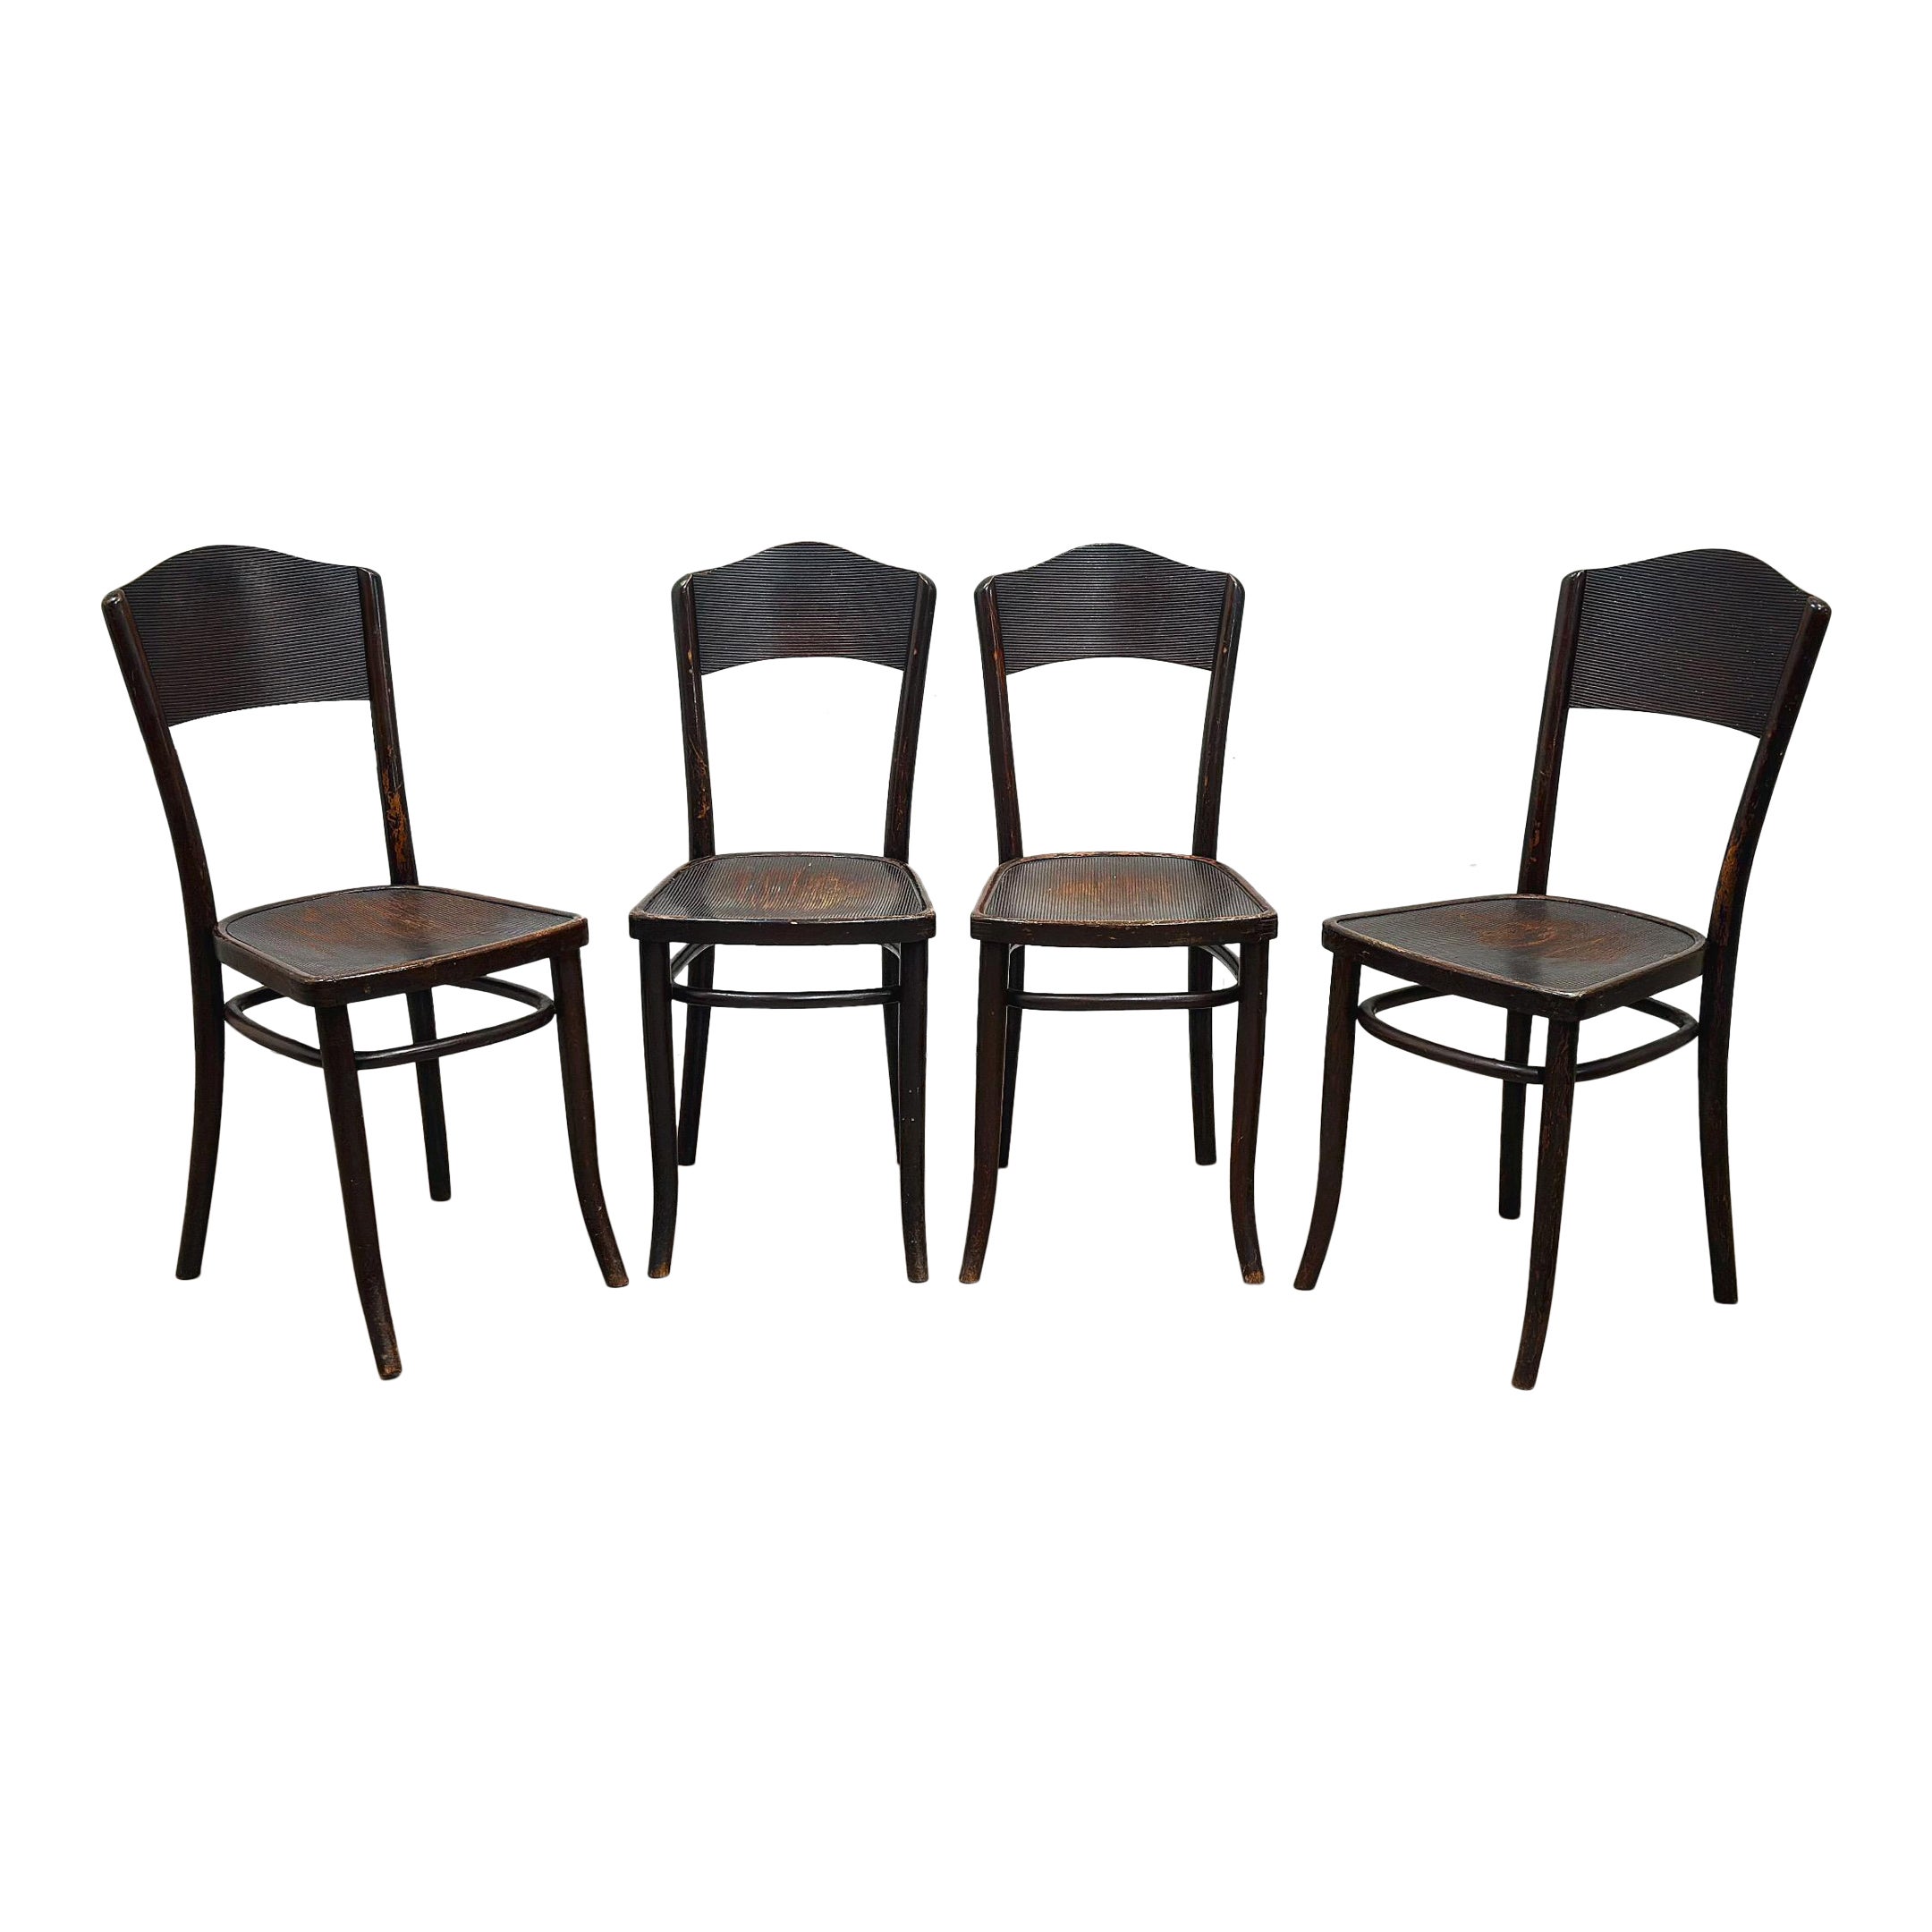 Thonet Bistro Cafe Dining Chairs - Bentwood Vienna Secessionist - Set of 4 